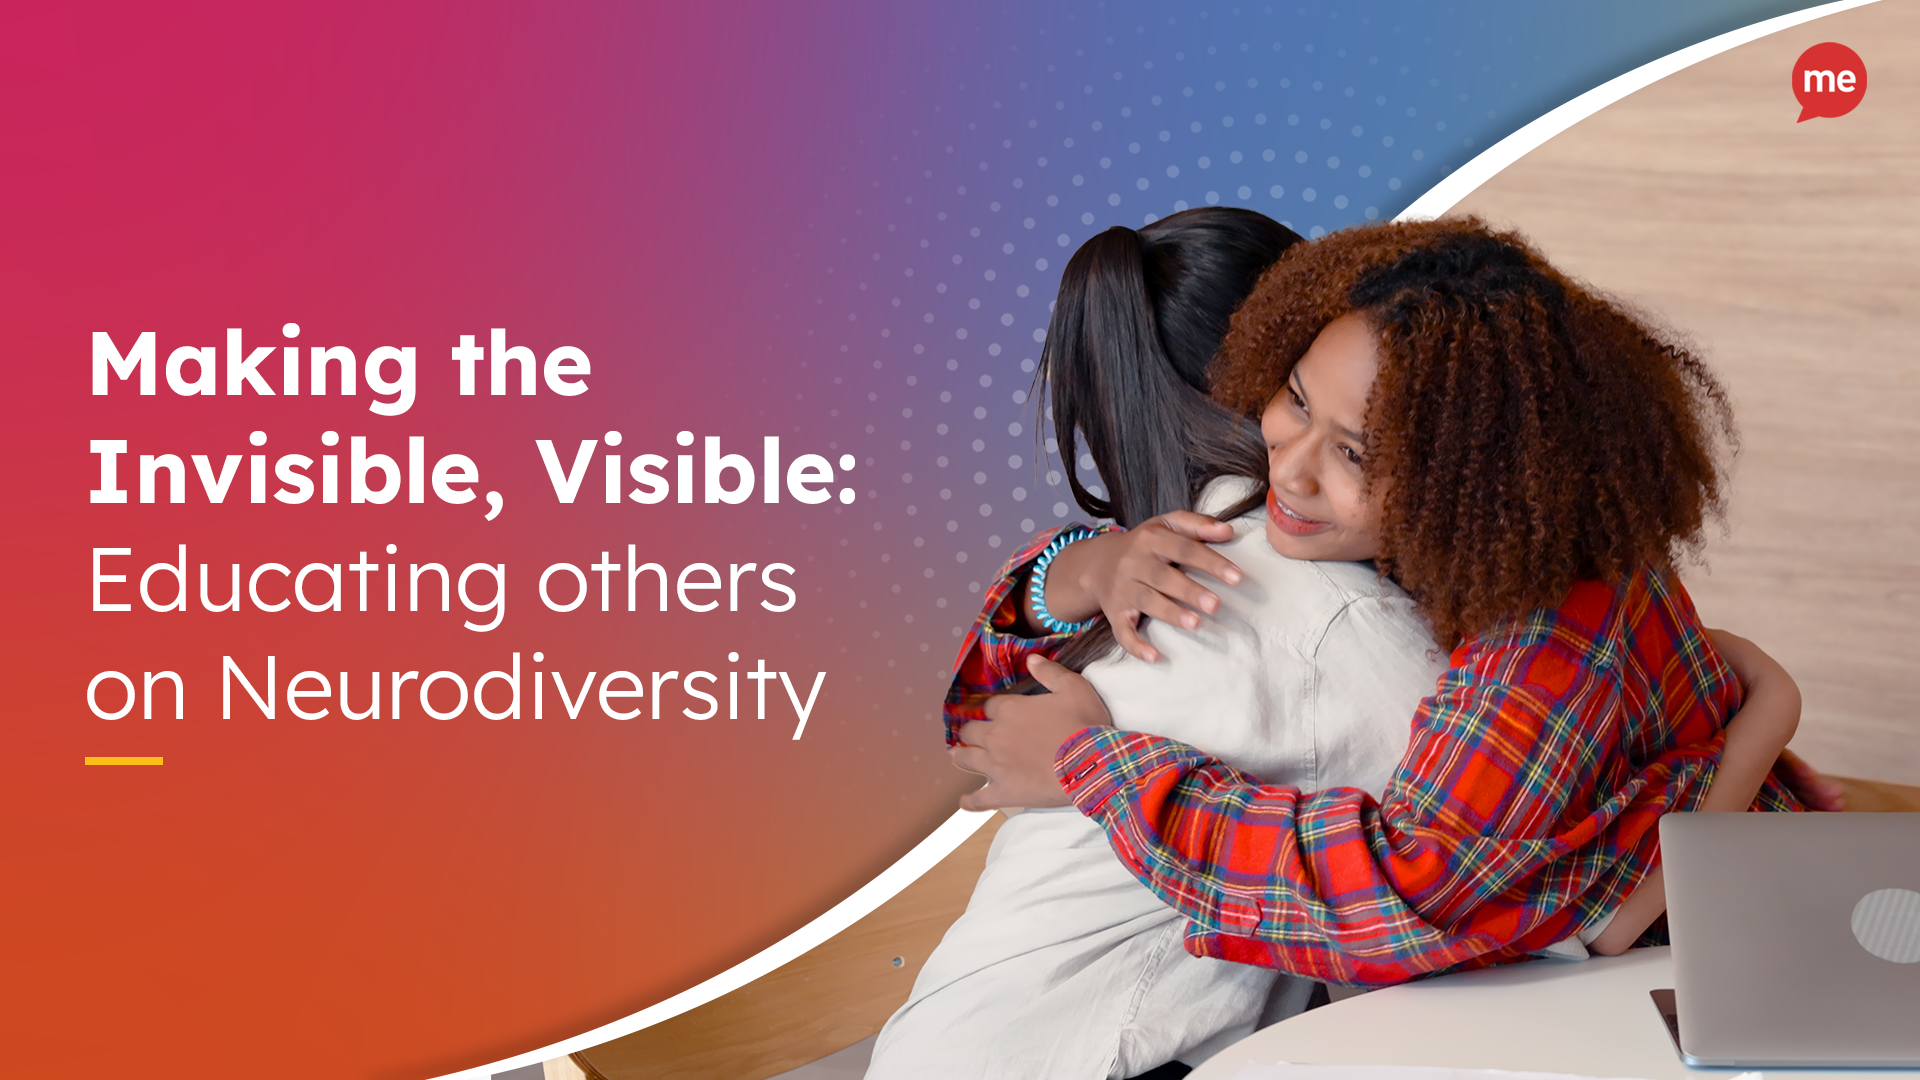 Making the Invisible, Visible: Educating others on Neurodiversity